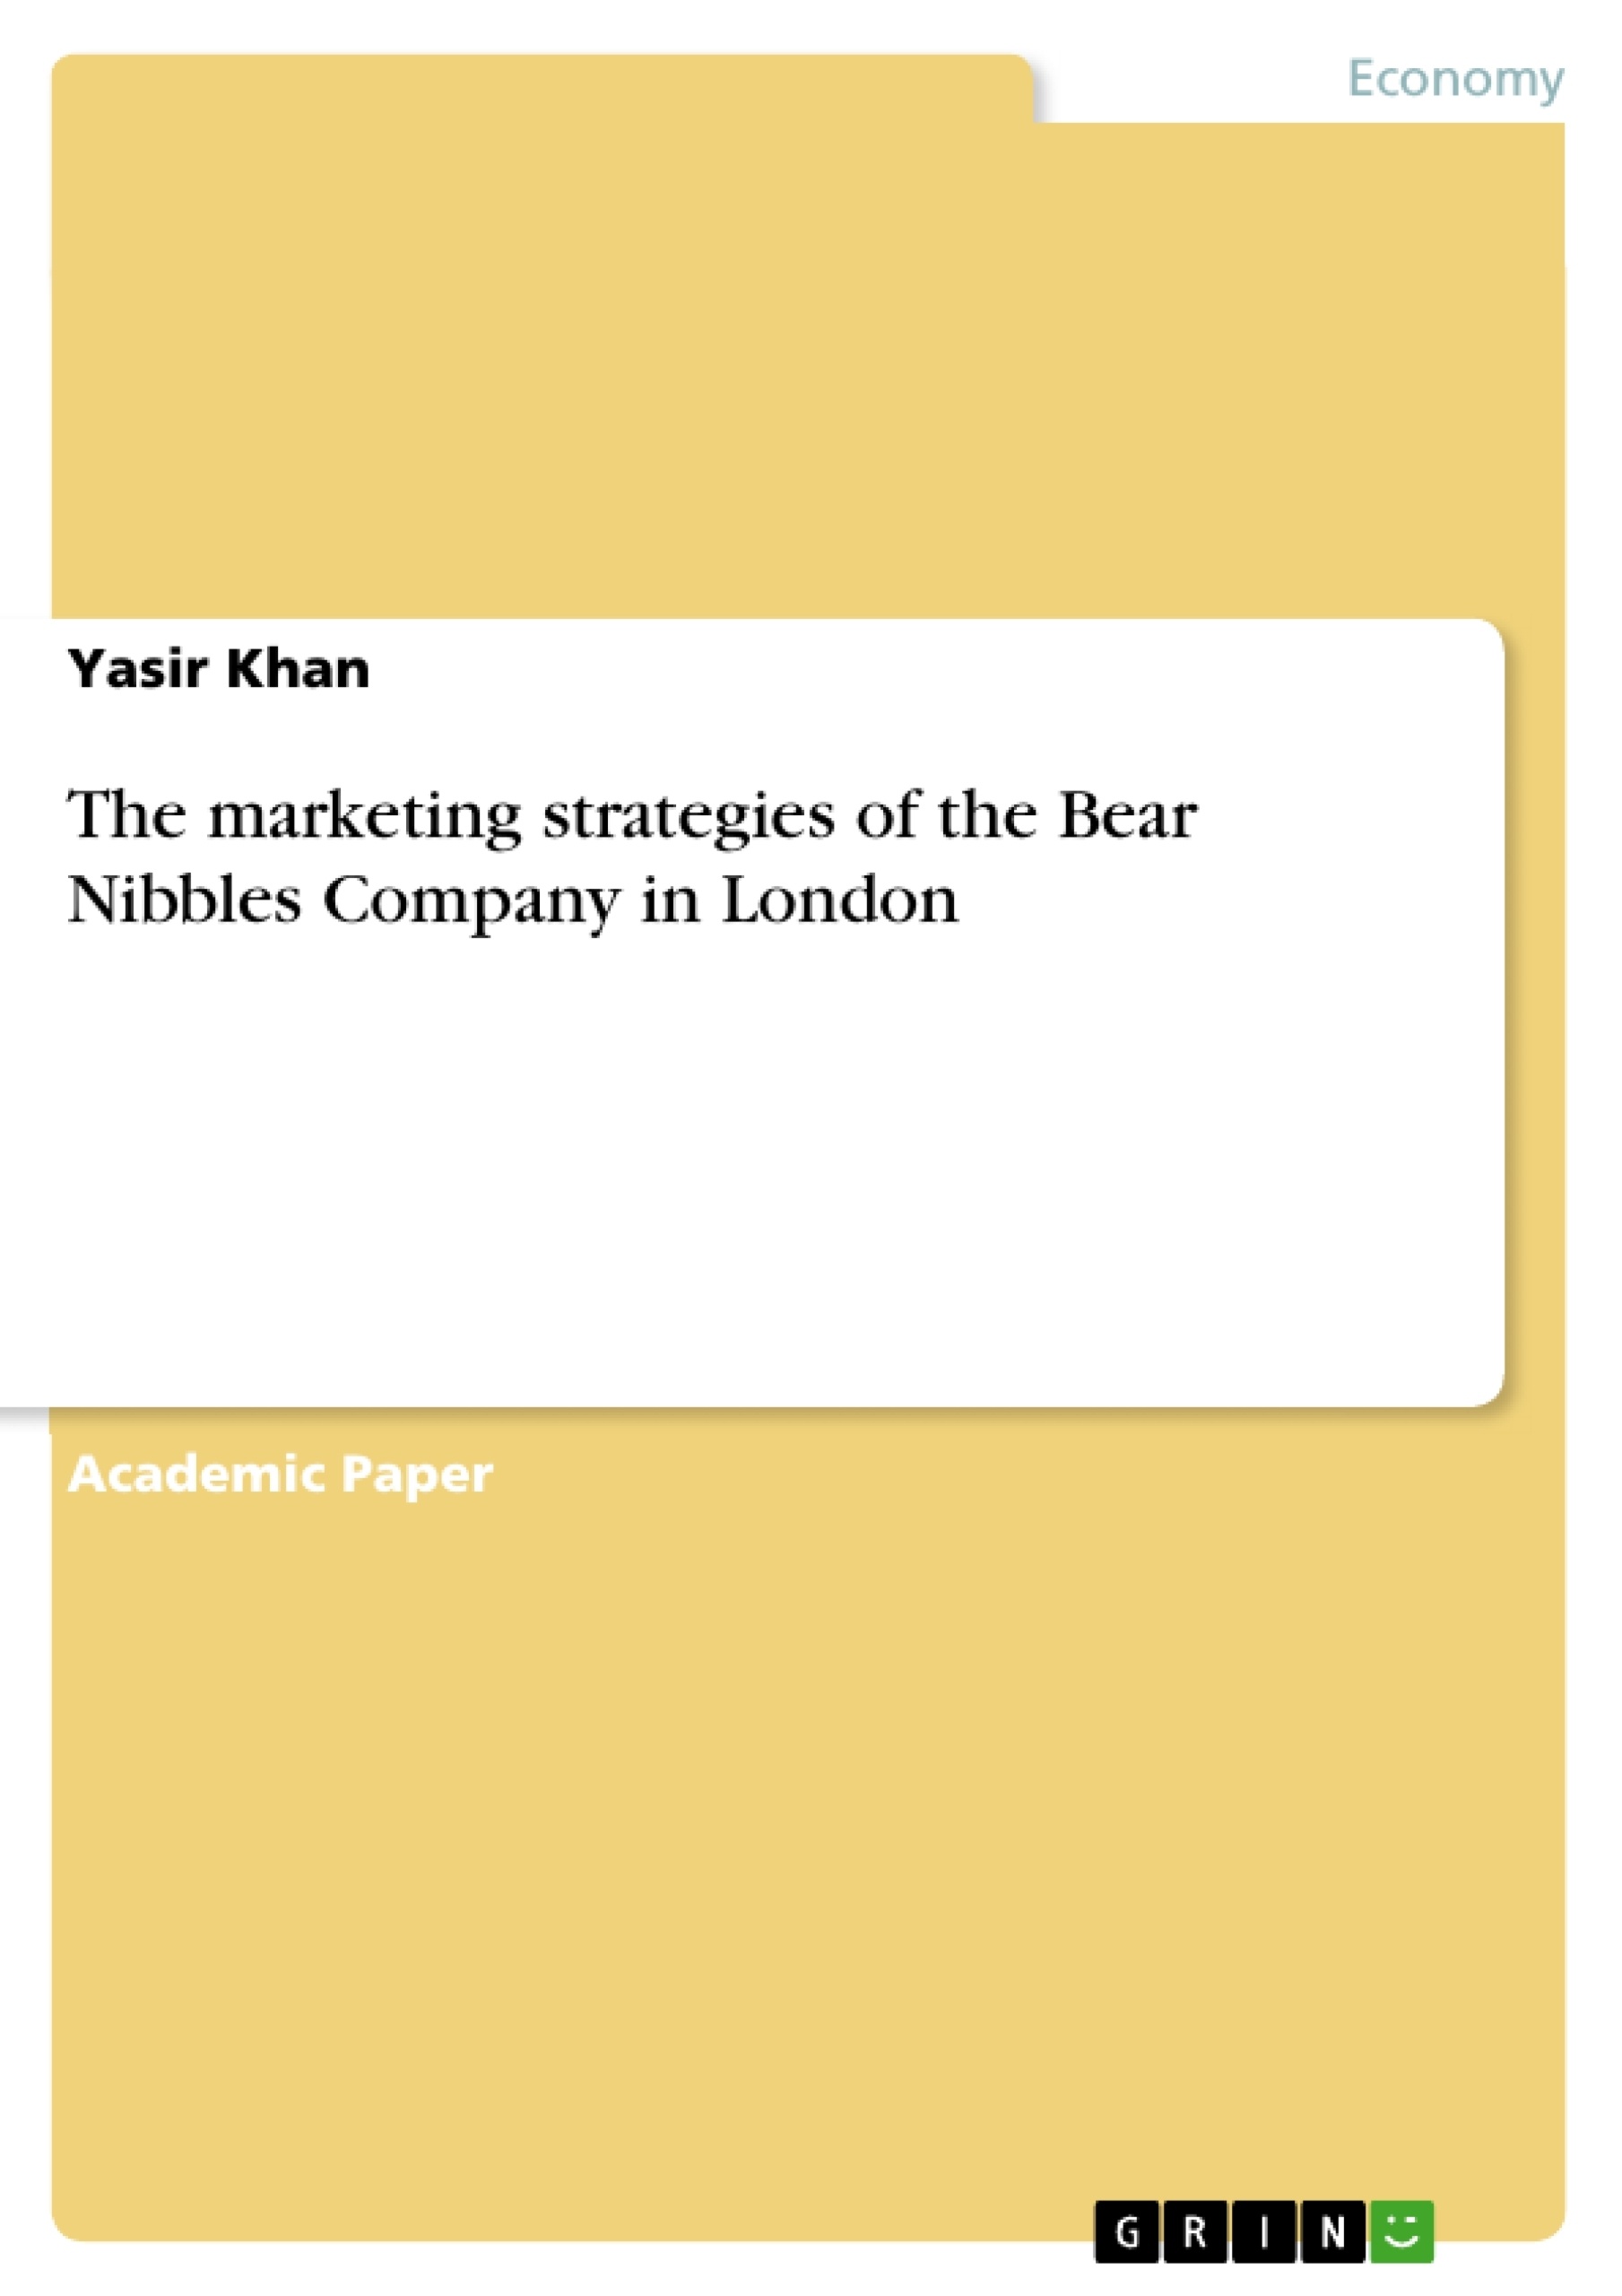 Título: The marketing strategies of the Bear Nibbles Company in London